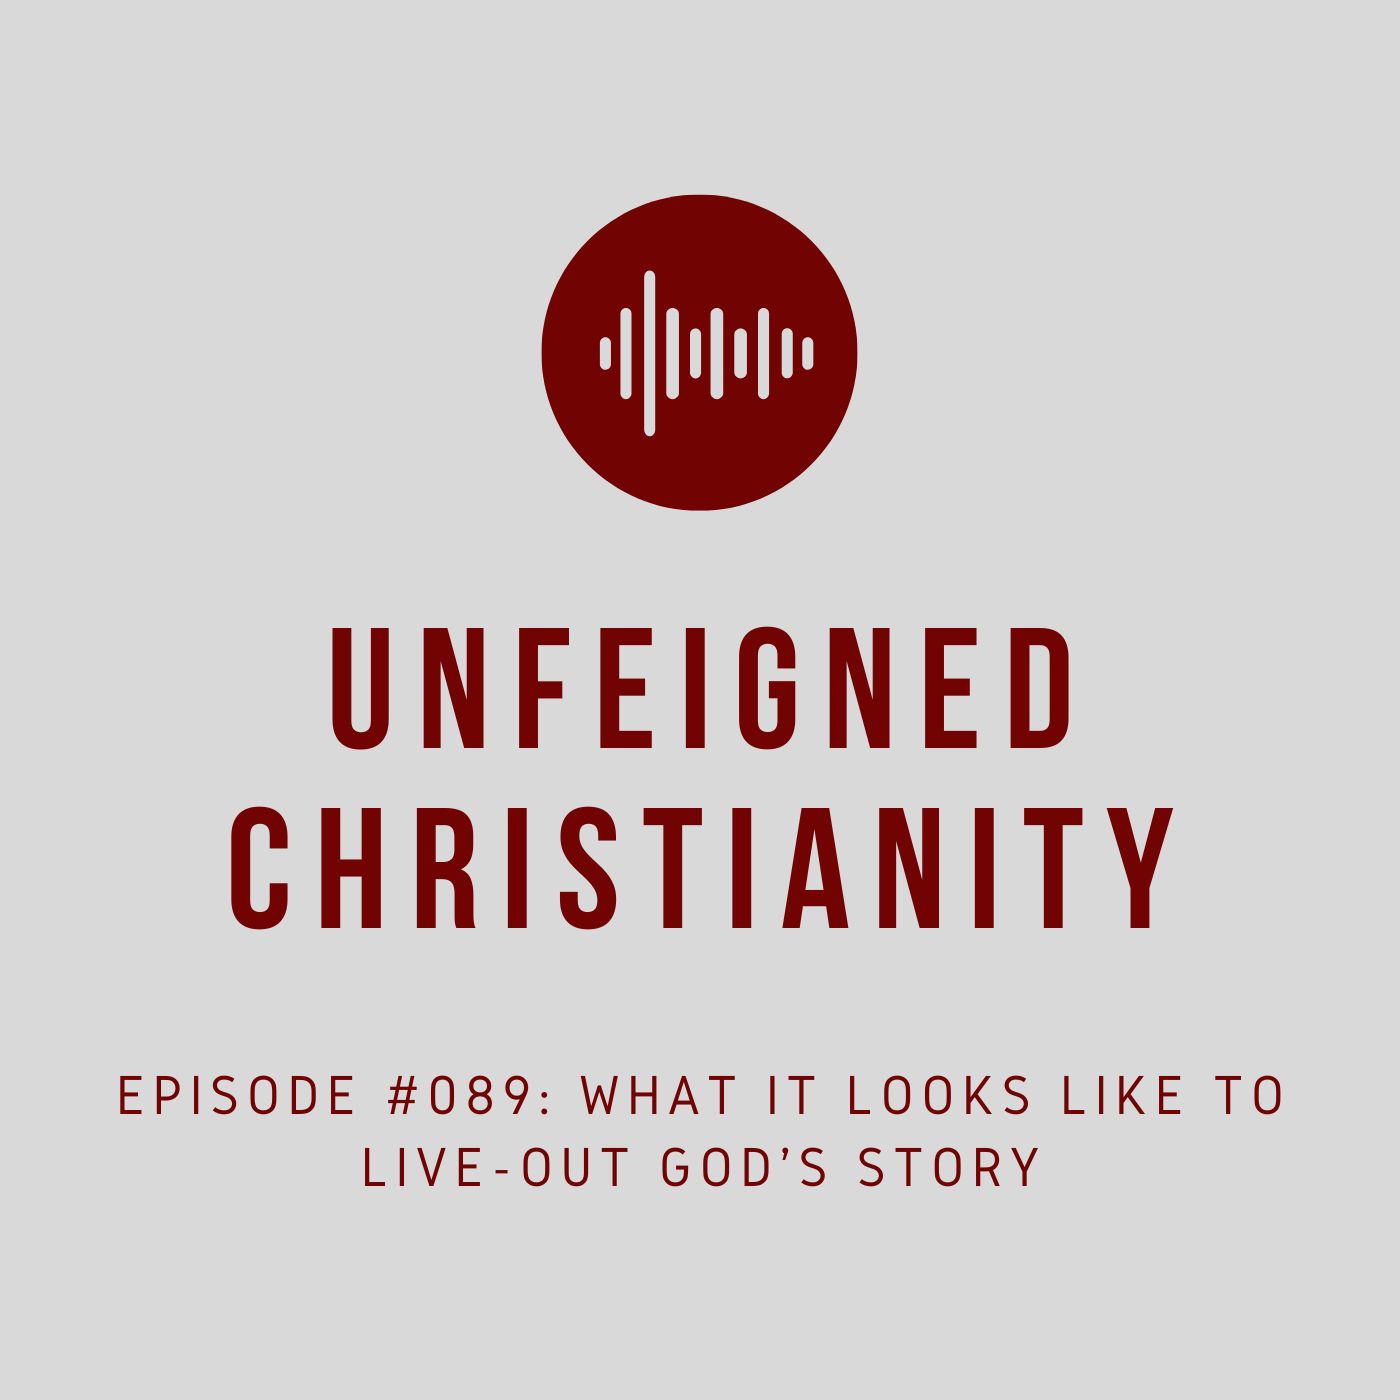 #089 - What It Looks Like to Live Out God’s Story